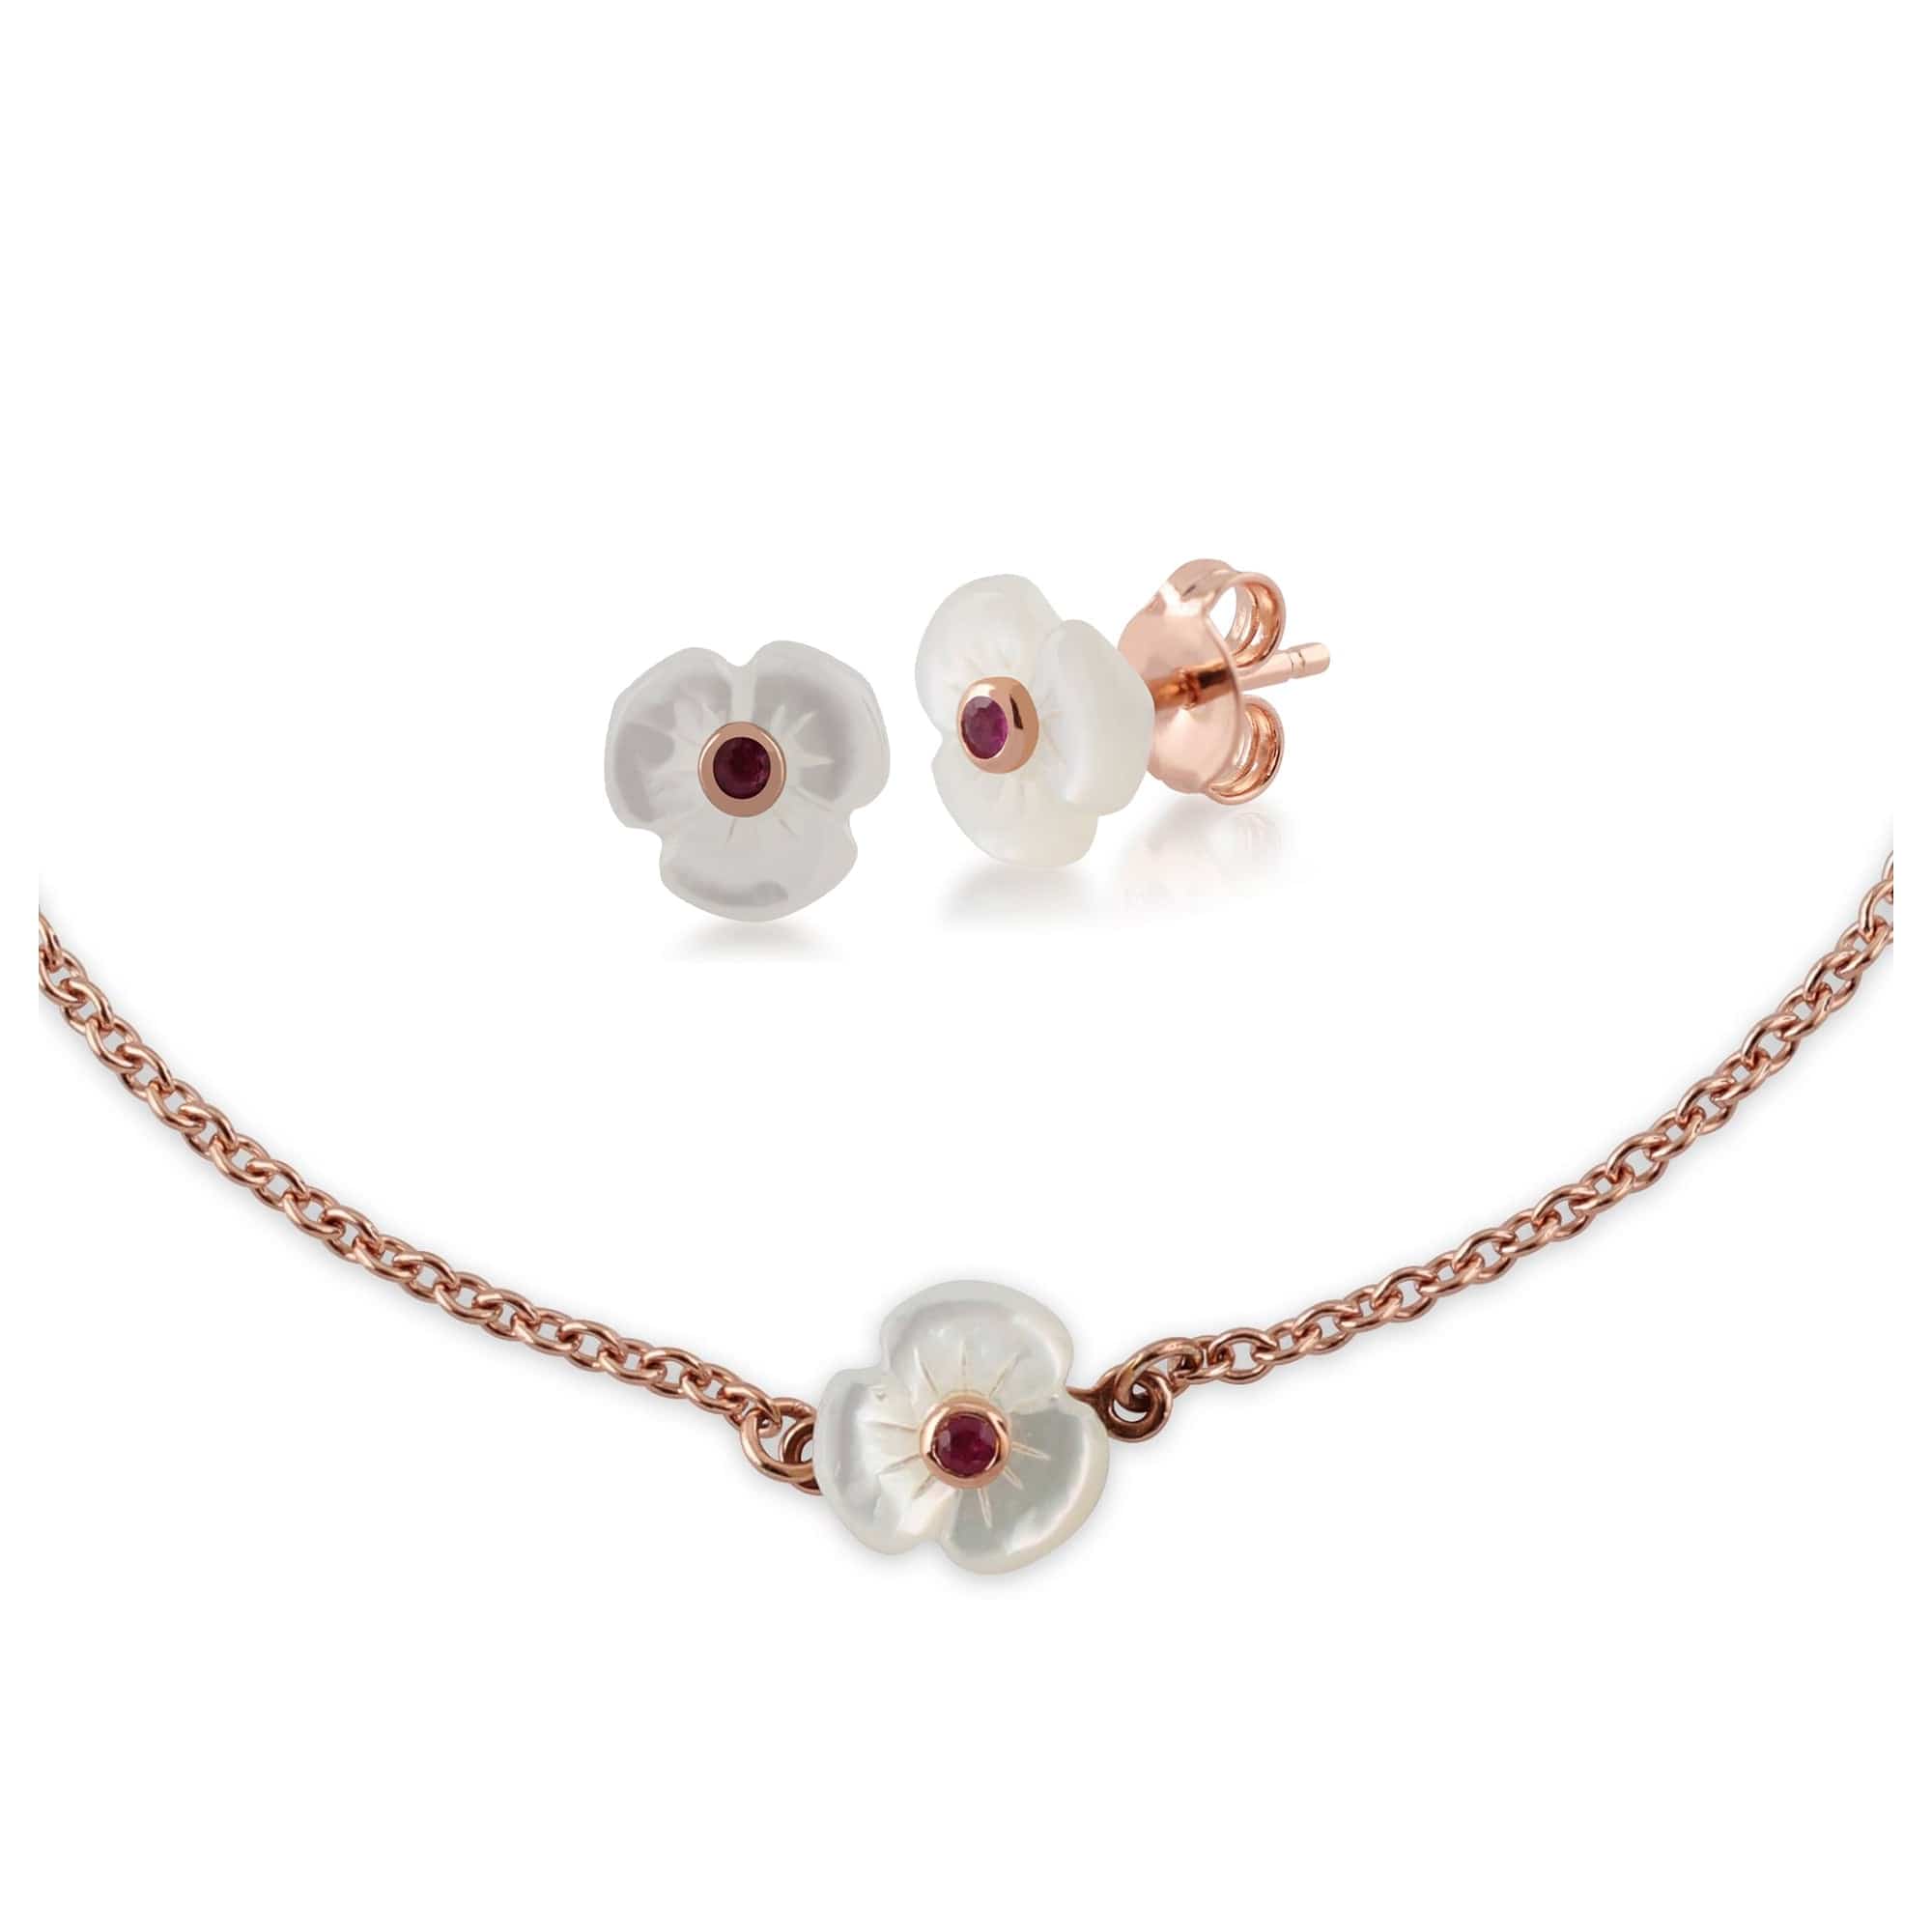 Floral Round Ruby & Mother of Pearl Daisy Stud Earrings & Bracelet Set in Rose Gold Plated 925 Sterling Silver - Gemondo